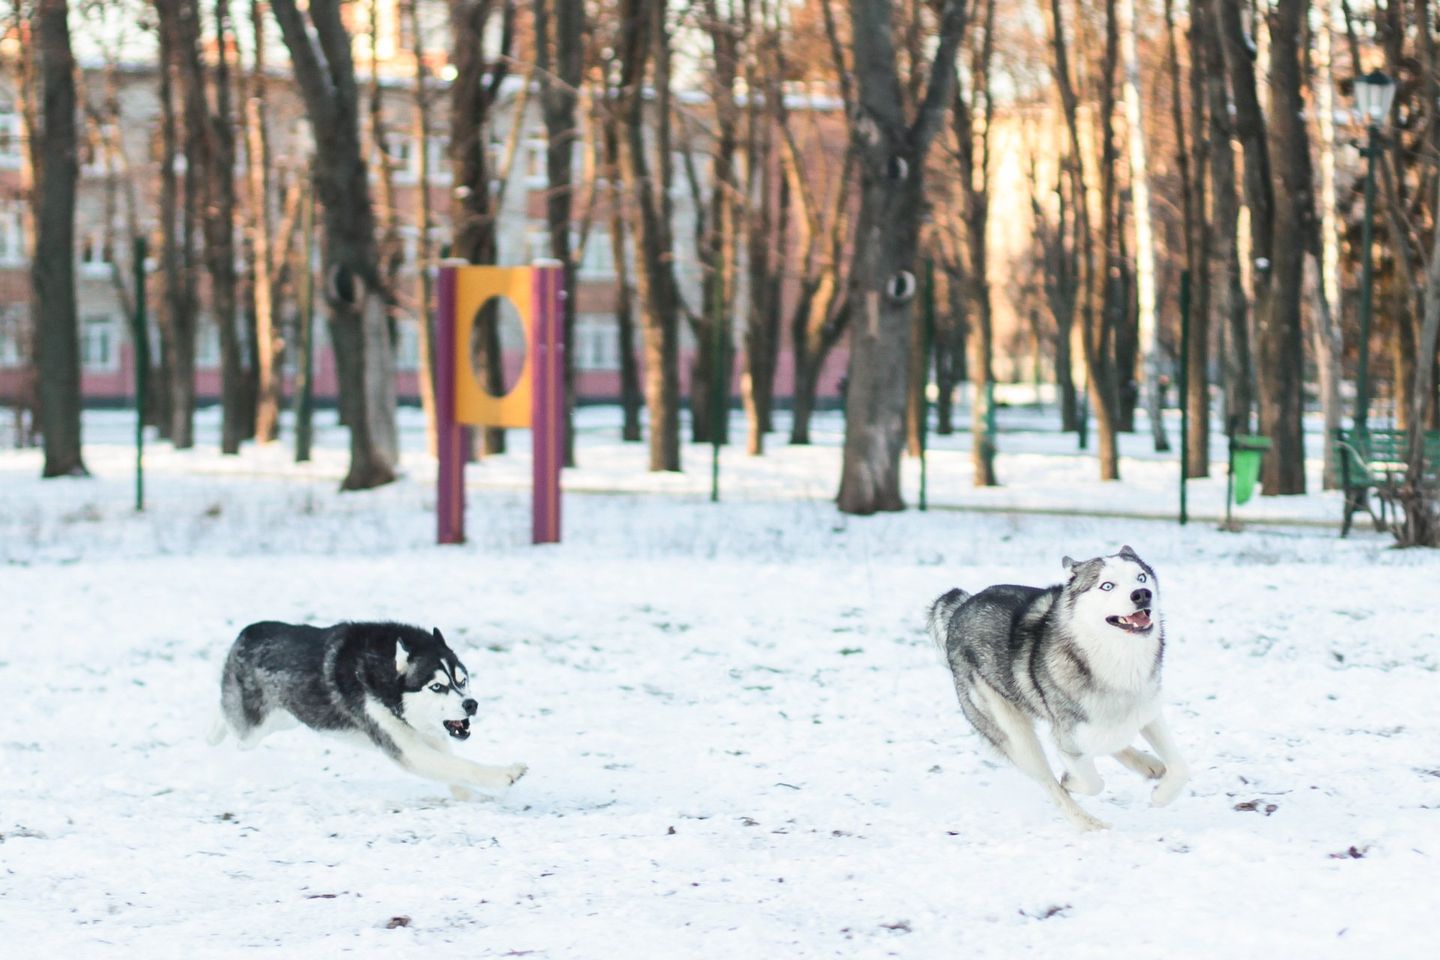 Two huskies chasing each other in the snow